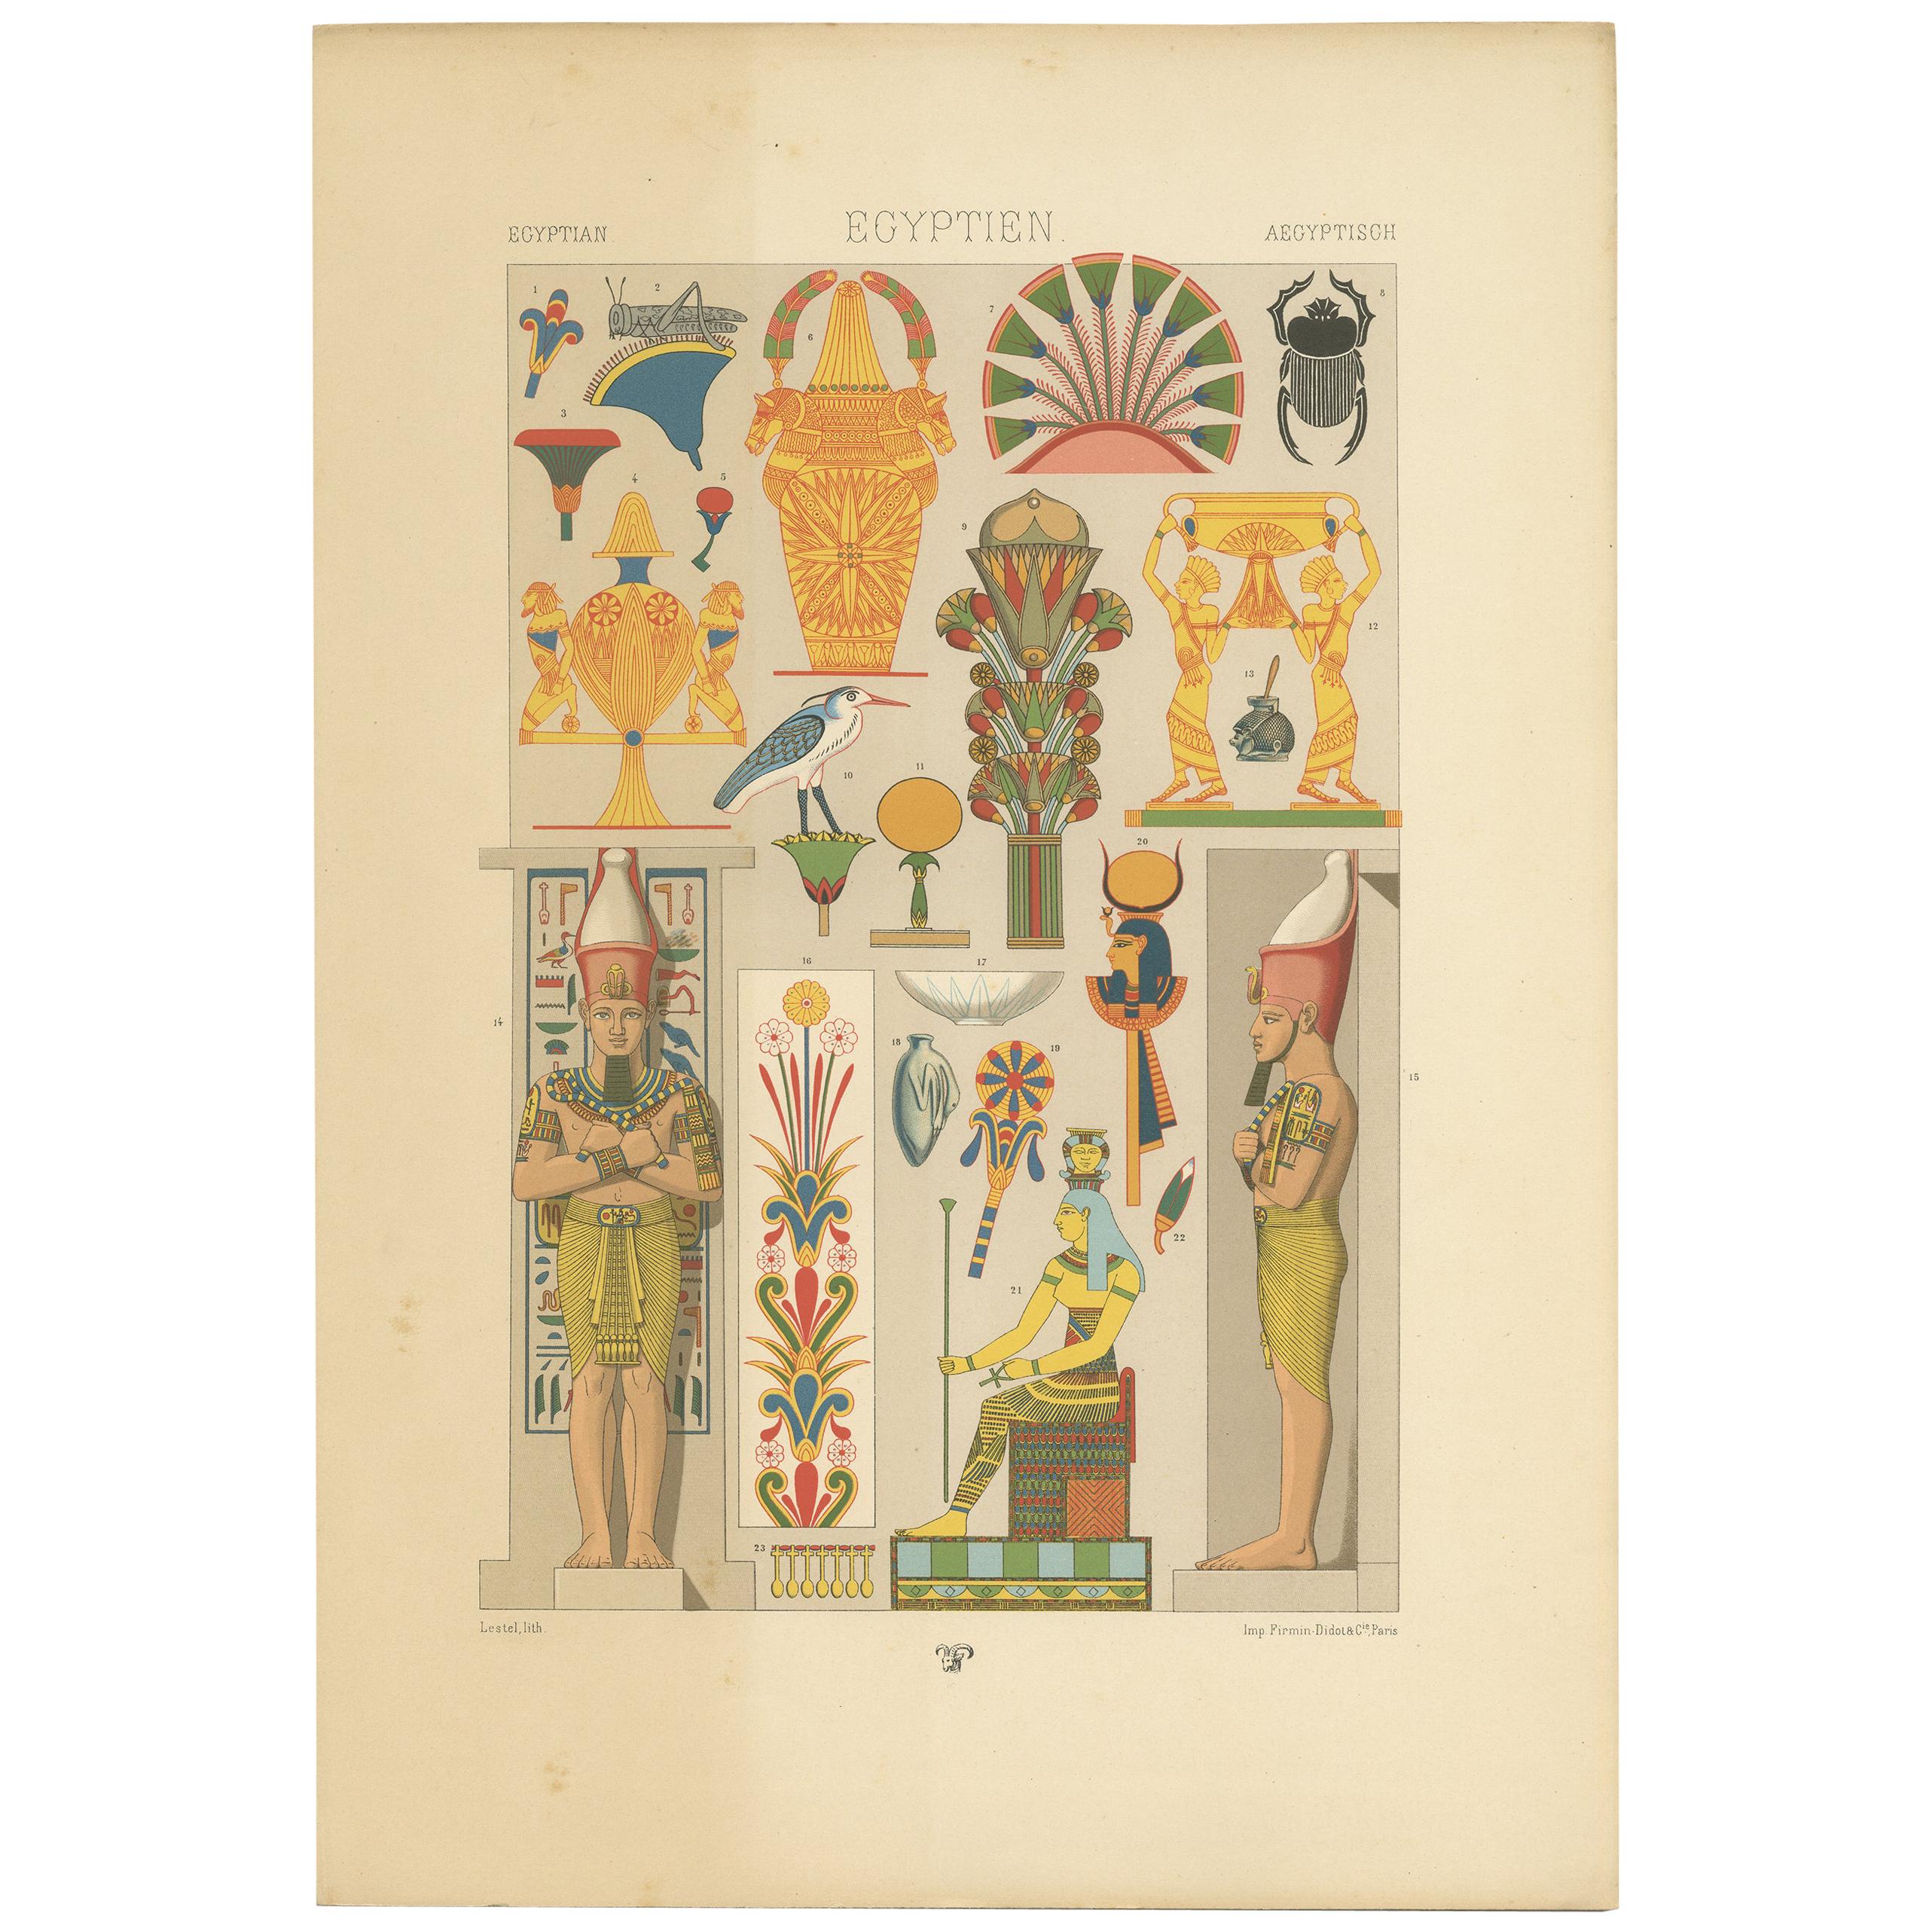 Pl. 1 Antique Print of Egyptian Motifs from Murals and Reliefs by Racinet